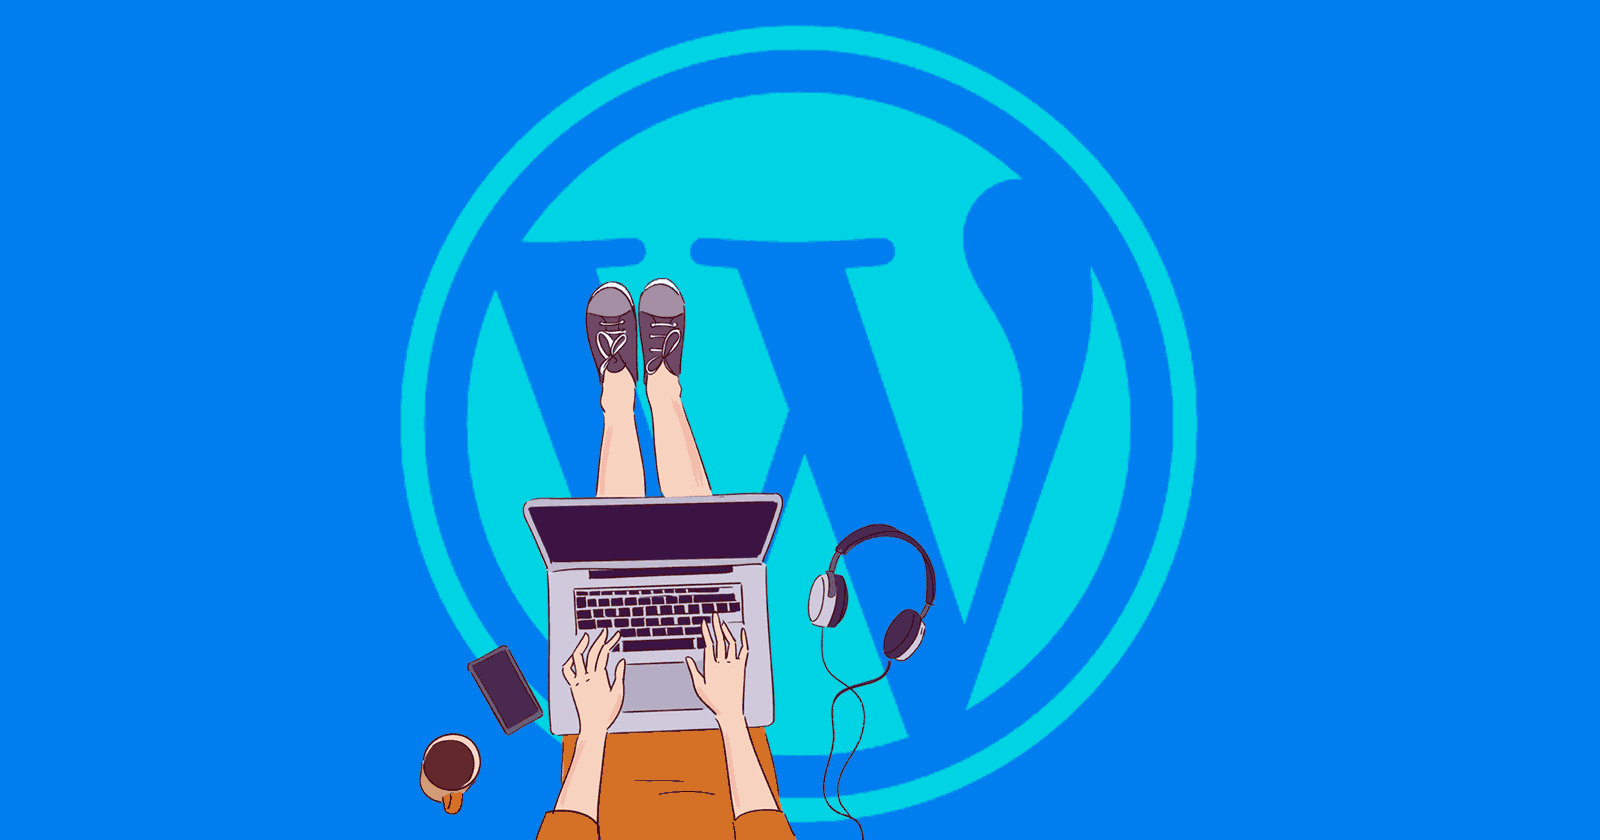 Top view image of a person working on a laptop sitting on top of the WordPress logo